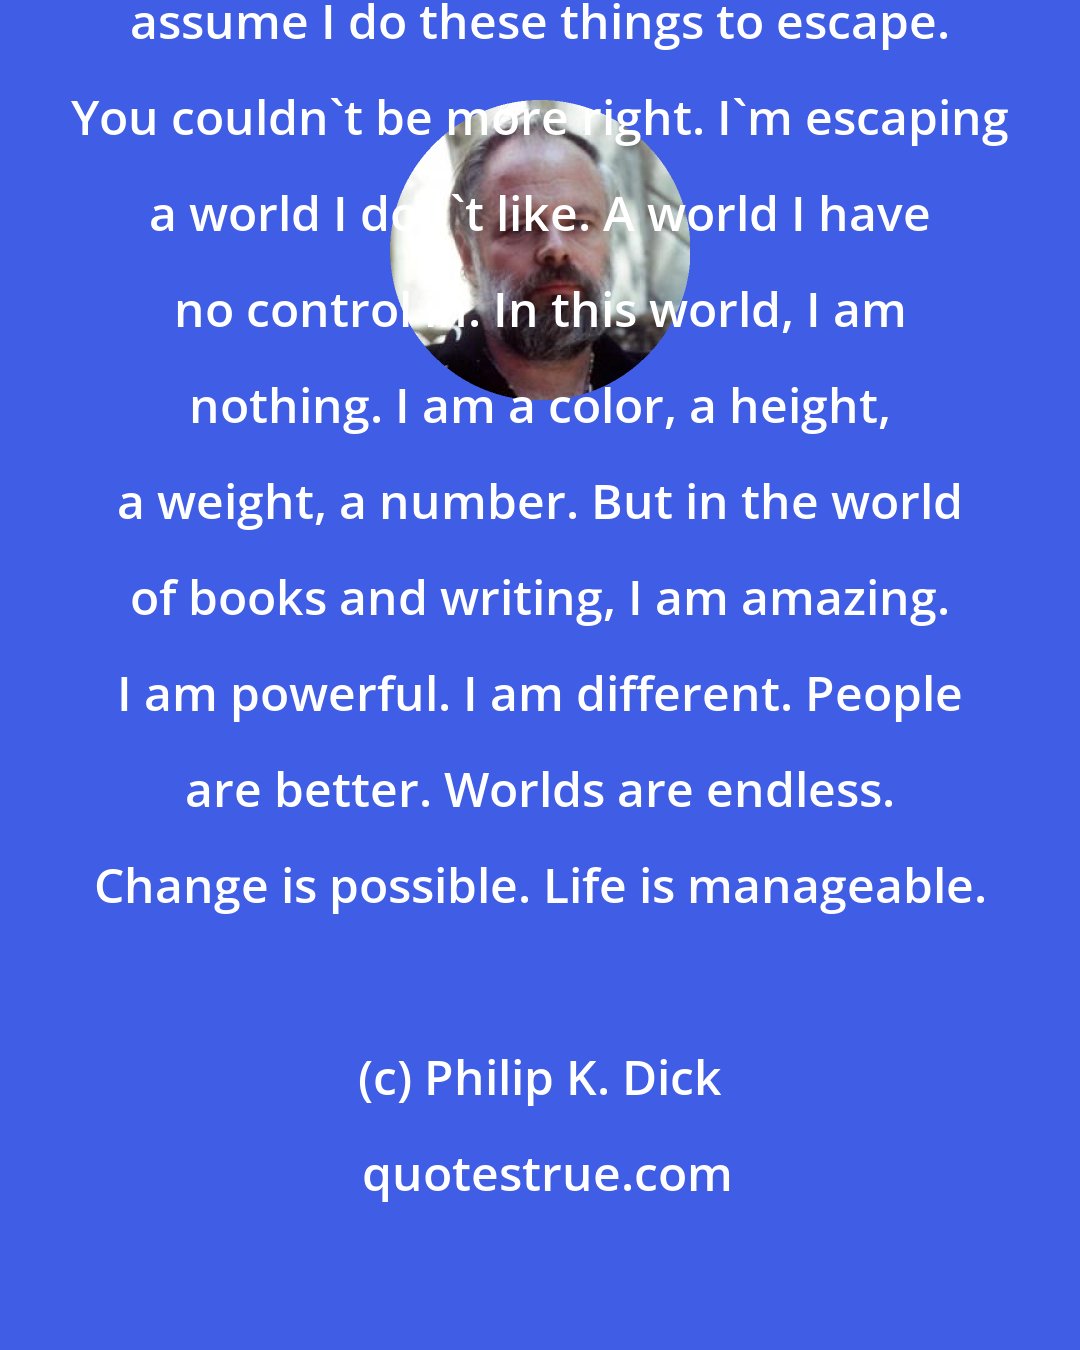 Philip K. Dick: I am a reader. I am a writer. People assume I do these things to escape. You couldn't be more right. I'm escaping a world I don't like. A world I have no control in. In this world, I am nothing. I am a color, a height, a weight, a number. But in the world of books and writing, I am amazing. I am powerful. I am different. People are better. Worlds are endless. Change is possible. Life is manageable.